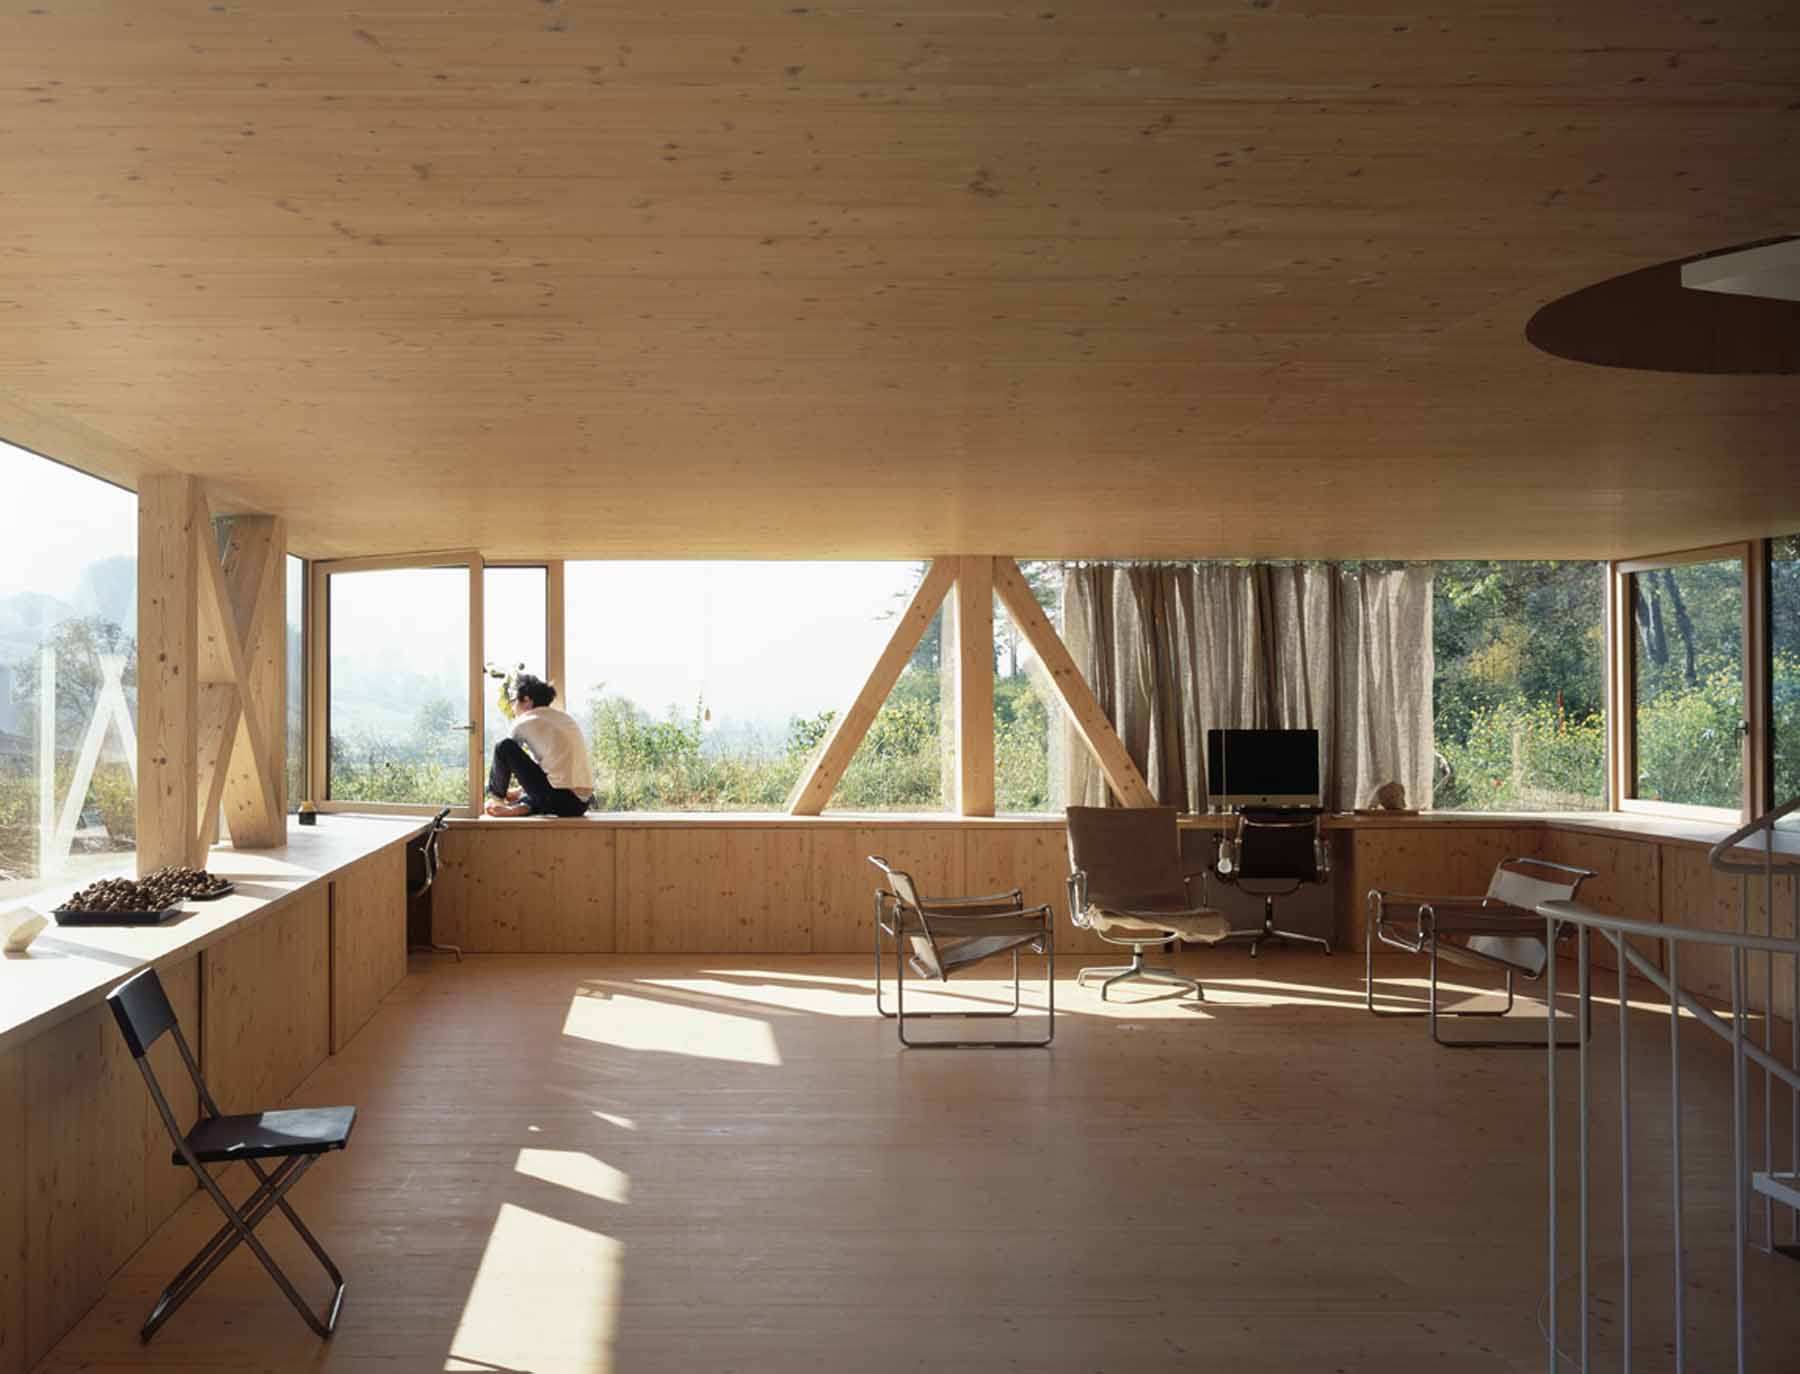 Ground Floor, House In Balsthal, Switzerland By Pascal Flammer Architect, 2014